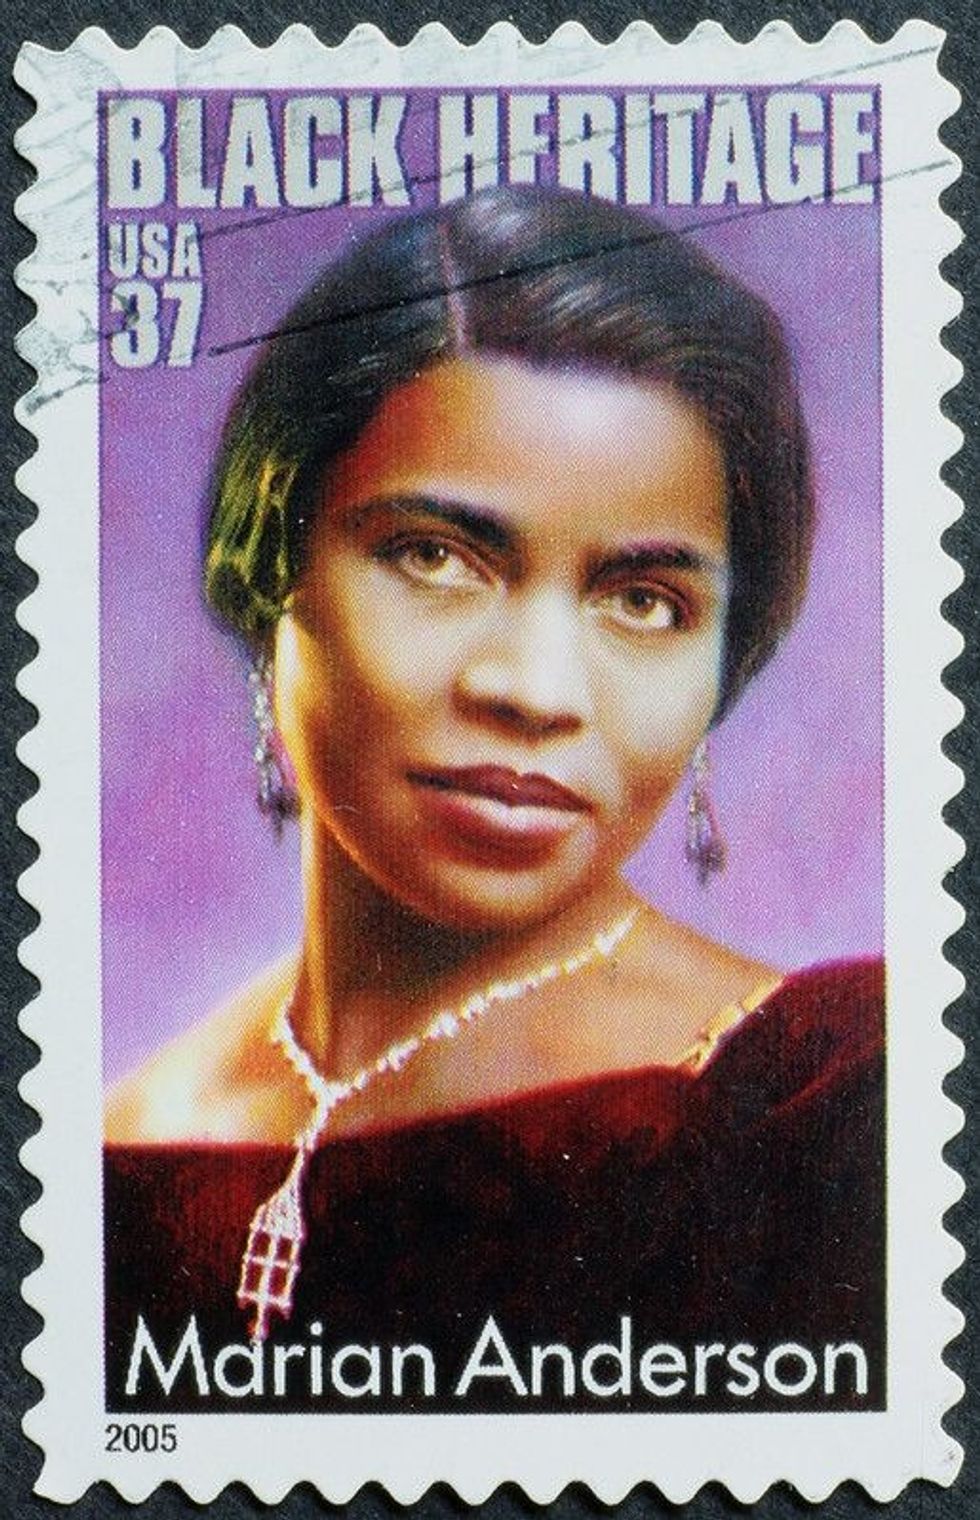 Have a look at these inspiring Marian Anderson quotes here.